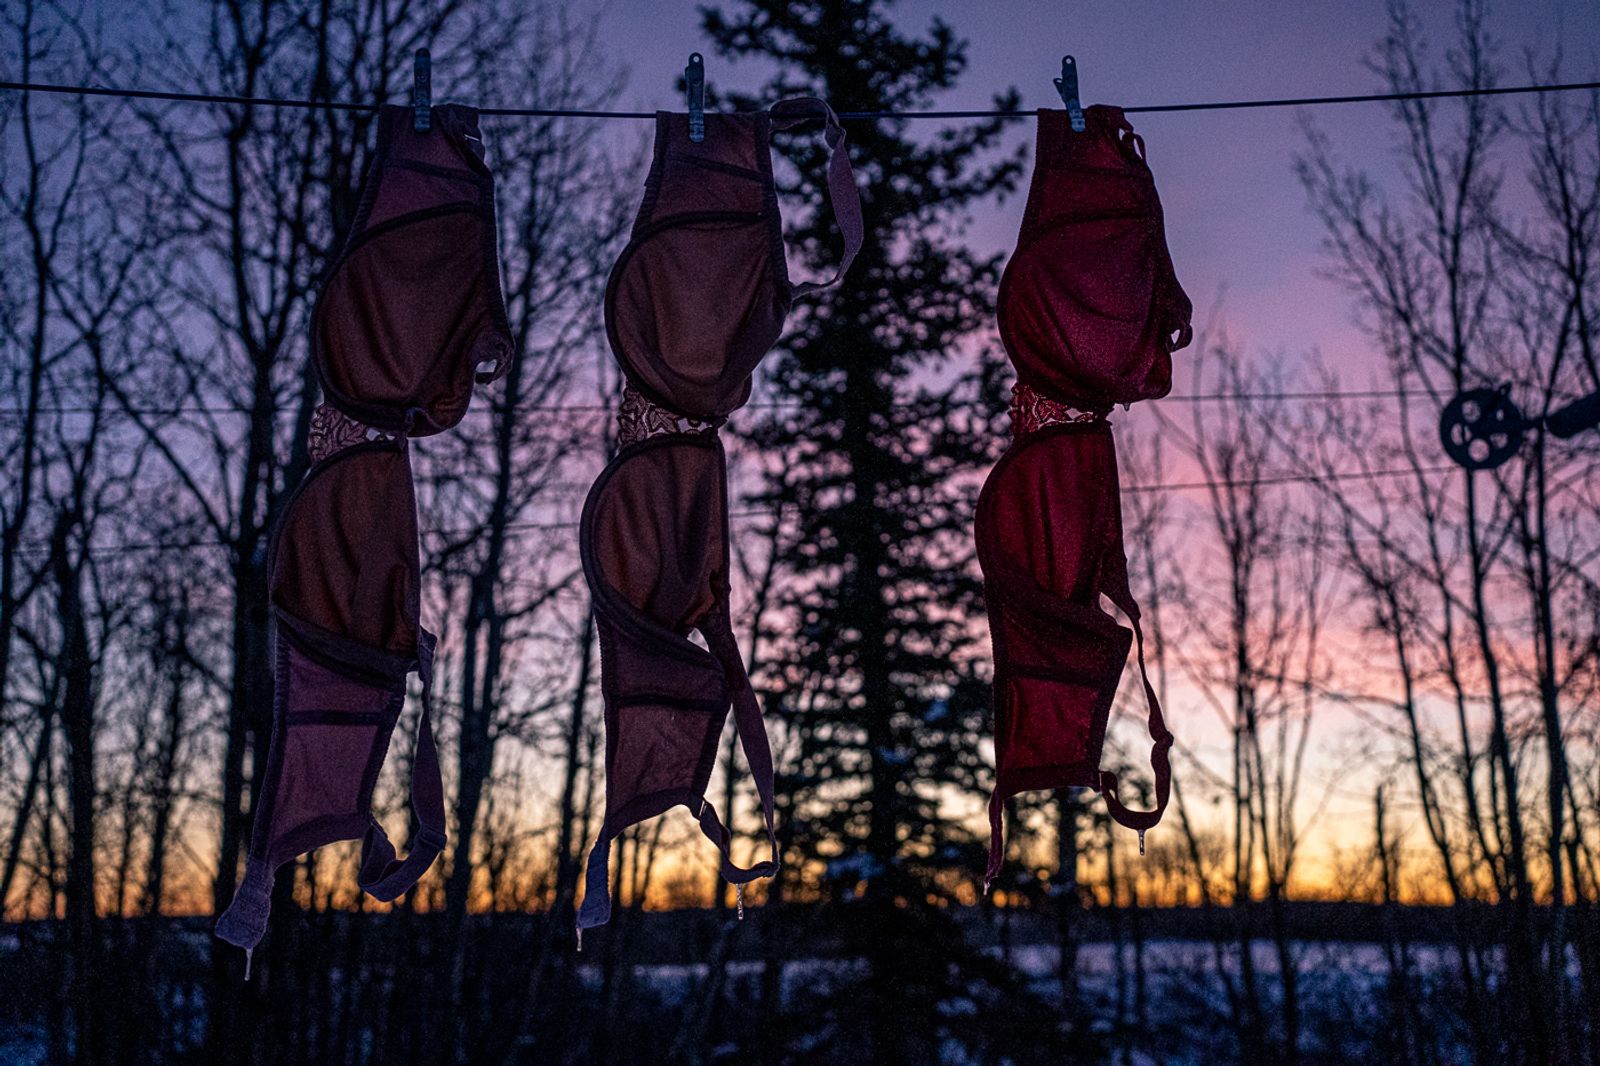 © Bobbi Barbarich - Her bras dry on the clothesline as the sun rises again.